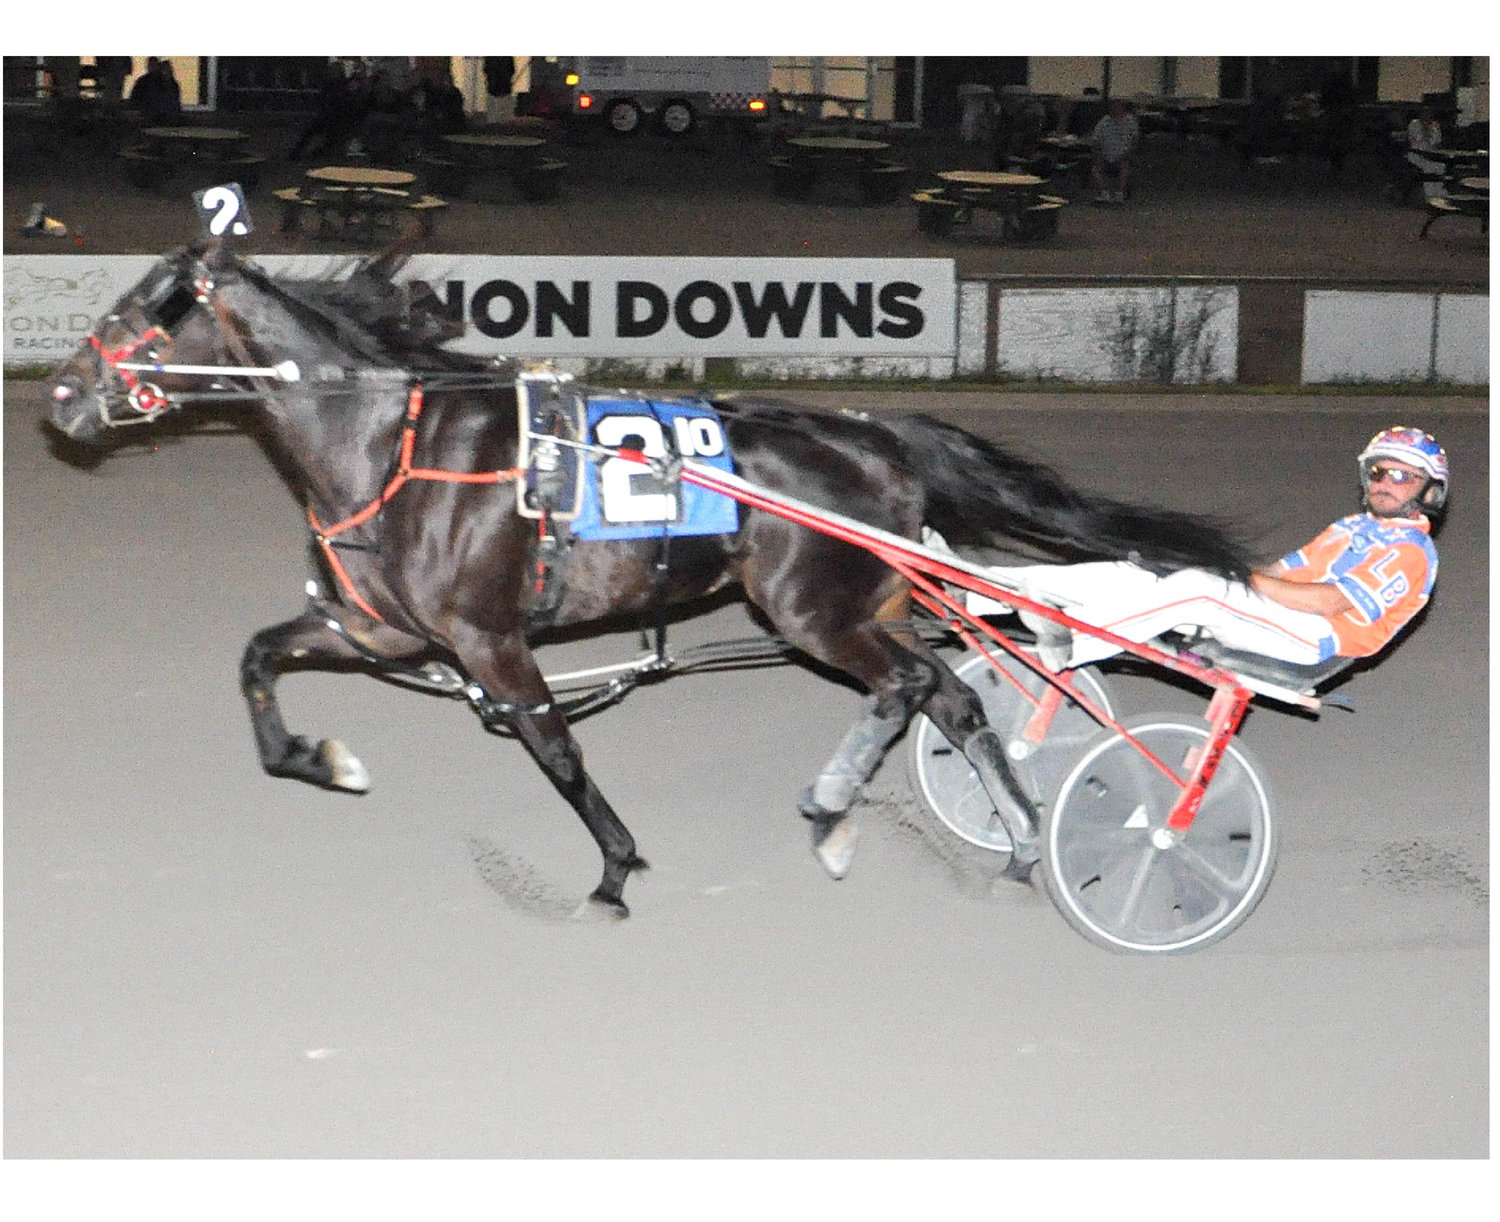 Discus Hanover and driver Leon Bailey won the $9,200 Open Trot at Vernon Downs Saturday. The horse won its third race of the season in a time of 1:55.4.